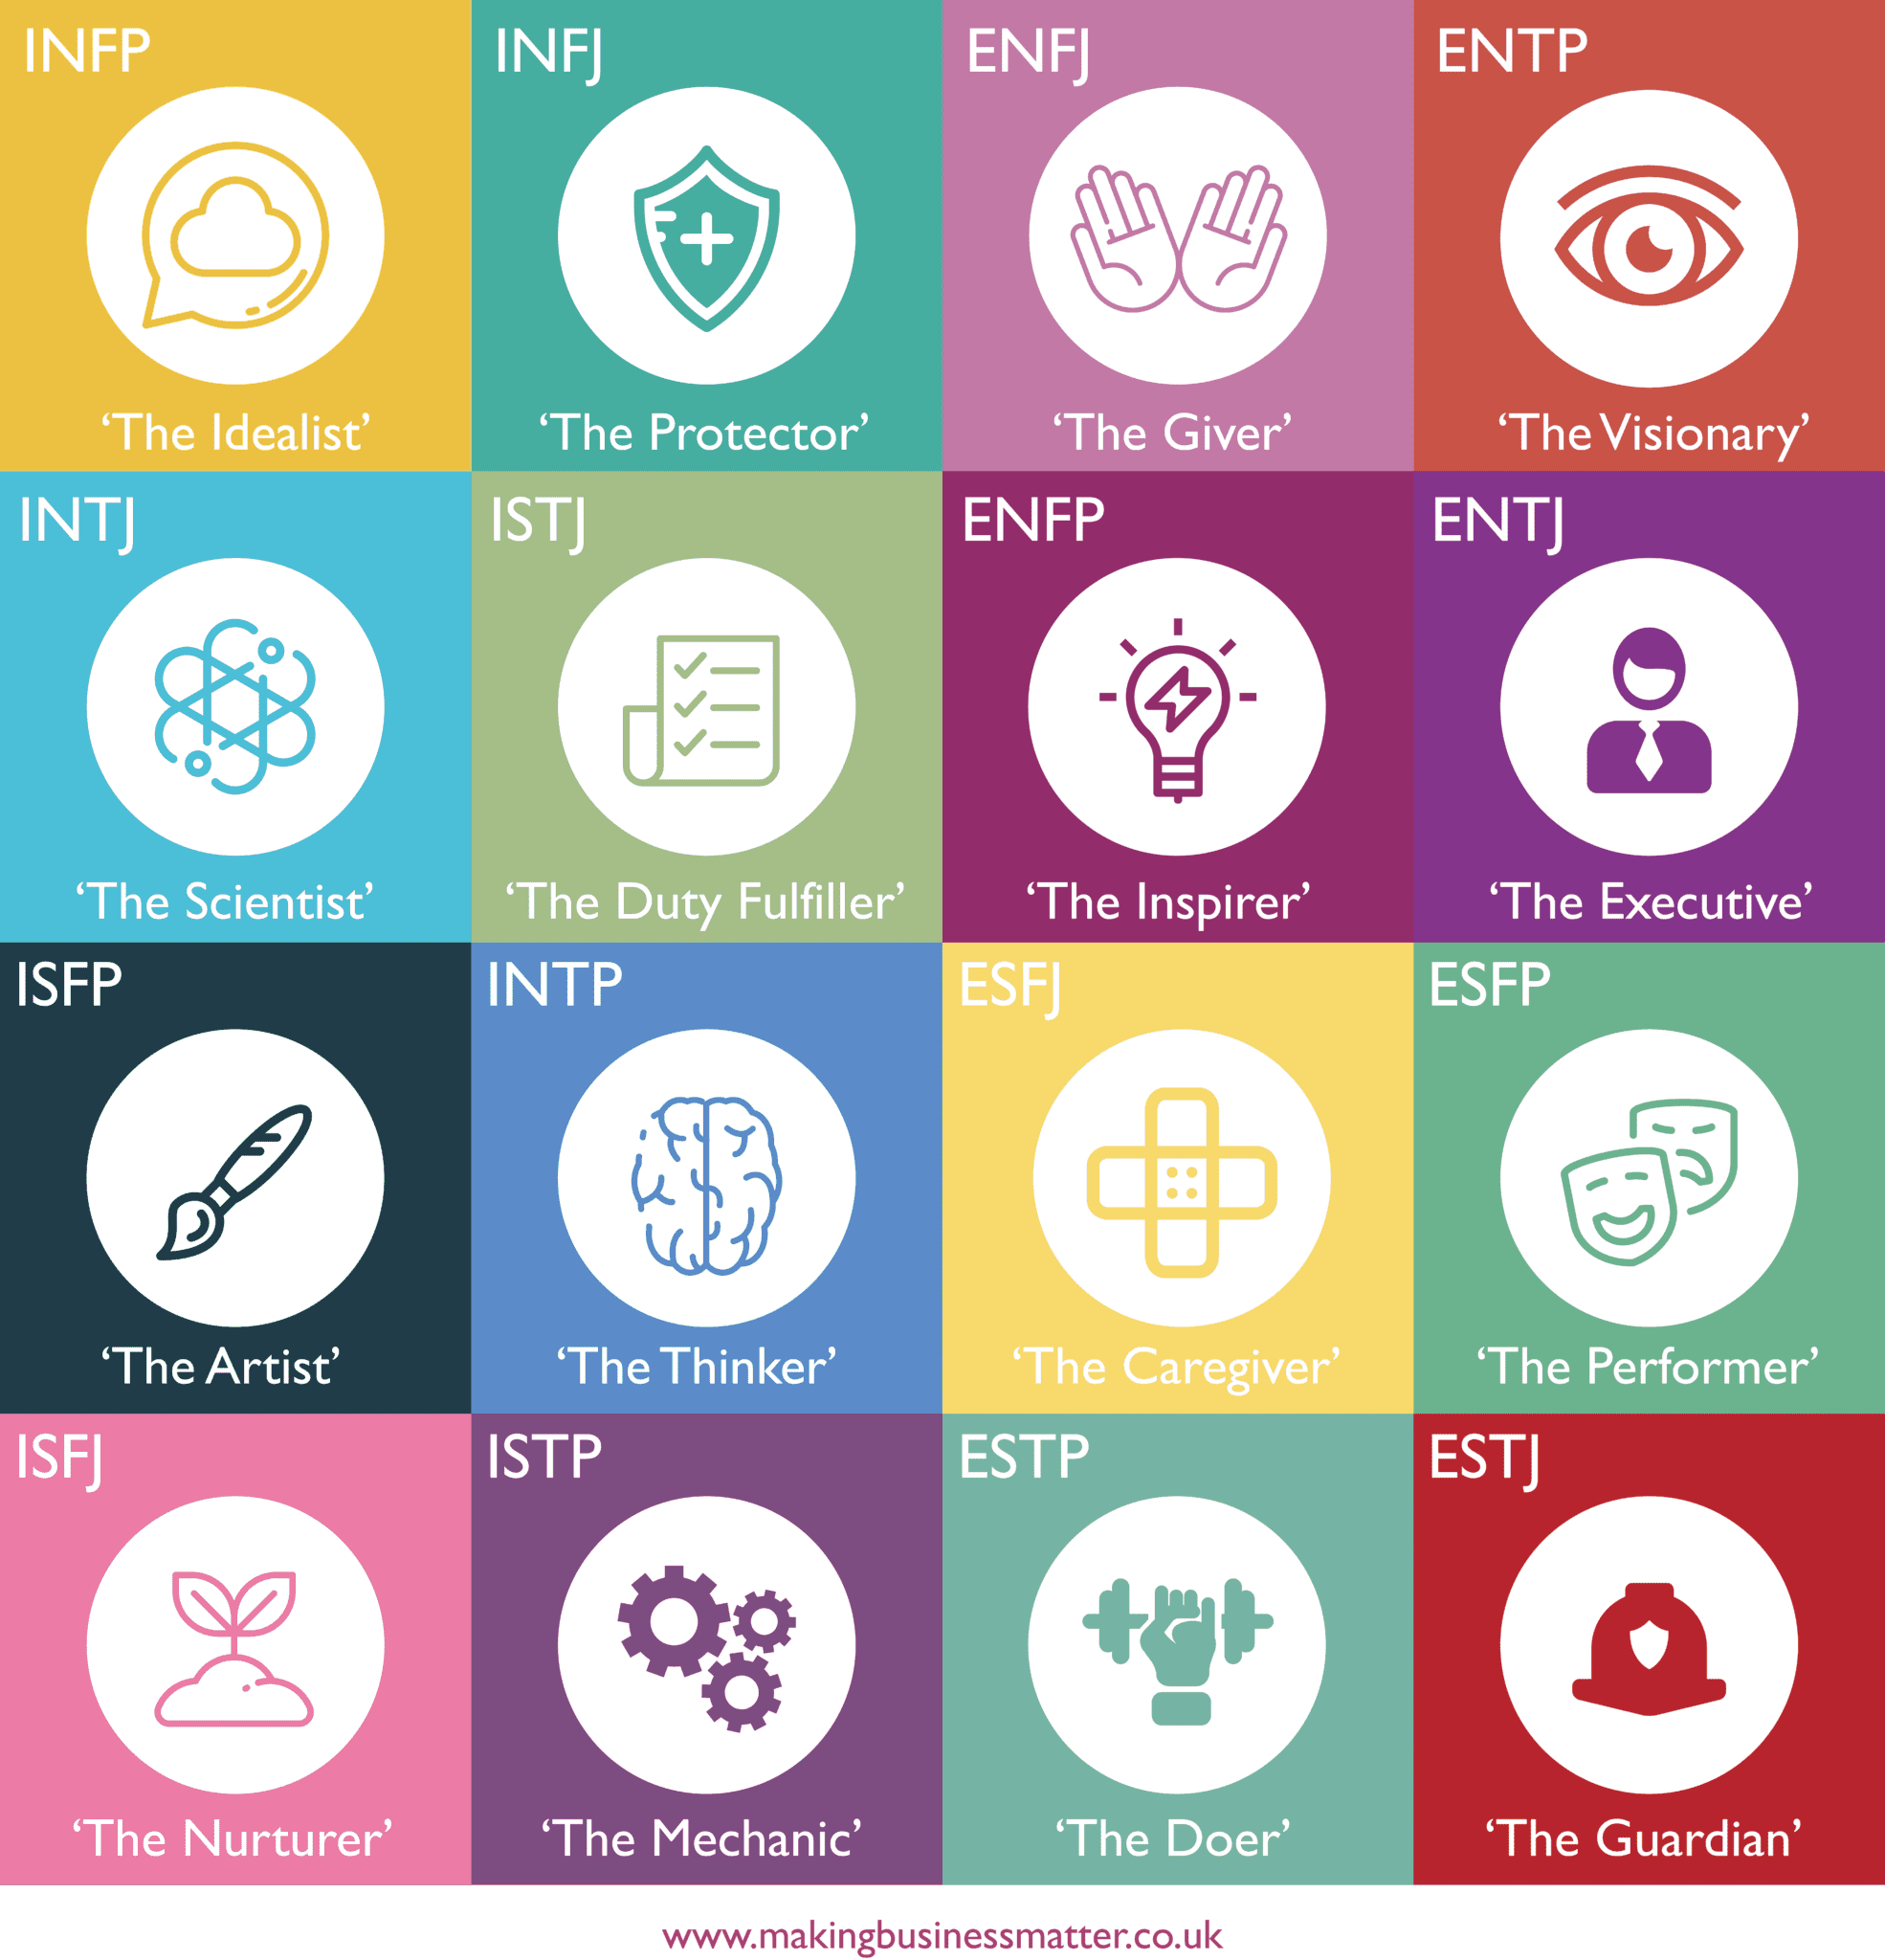 ENTP Personality Type: The Complete Guide